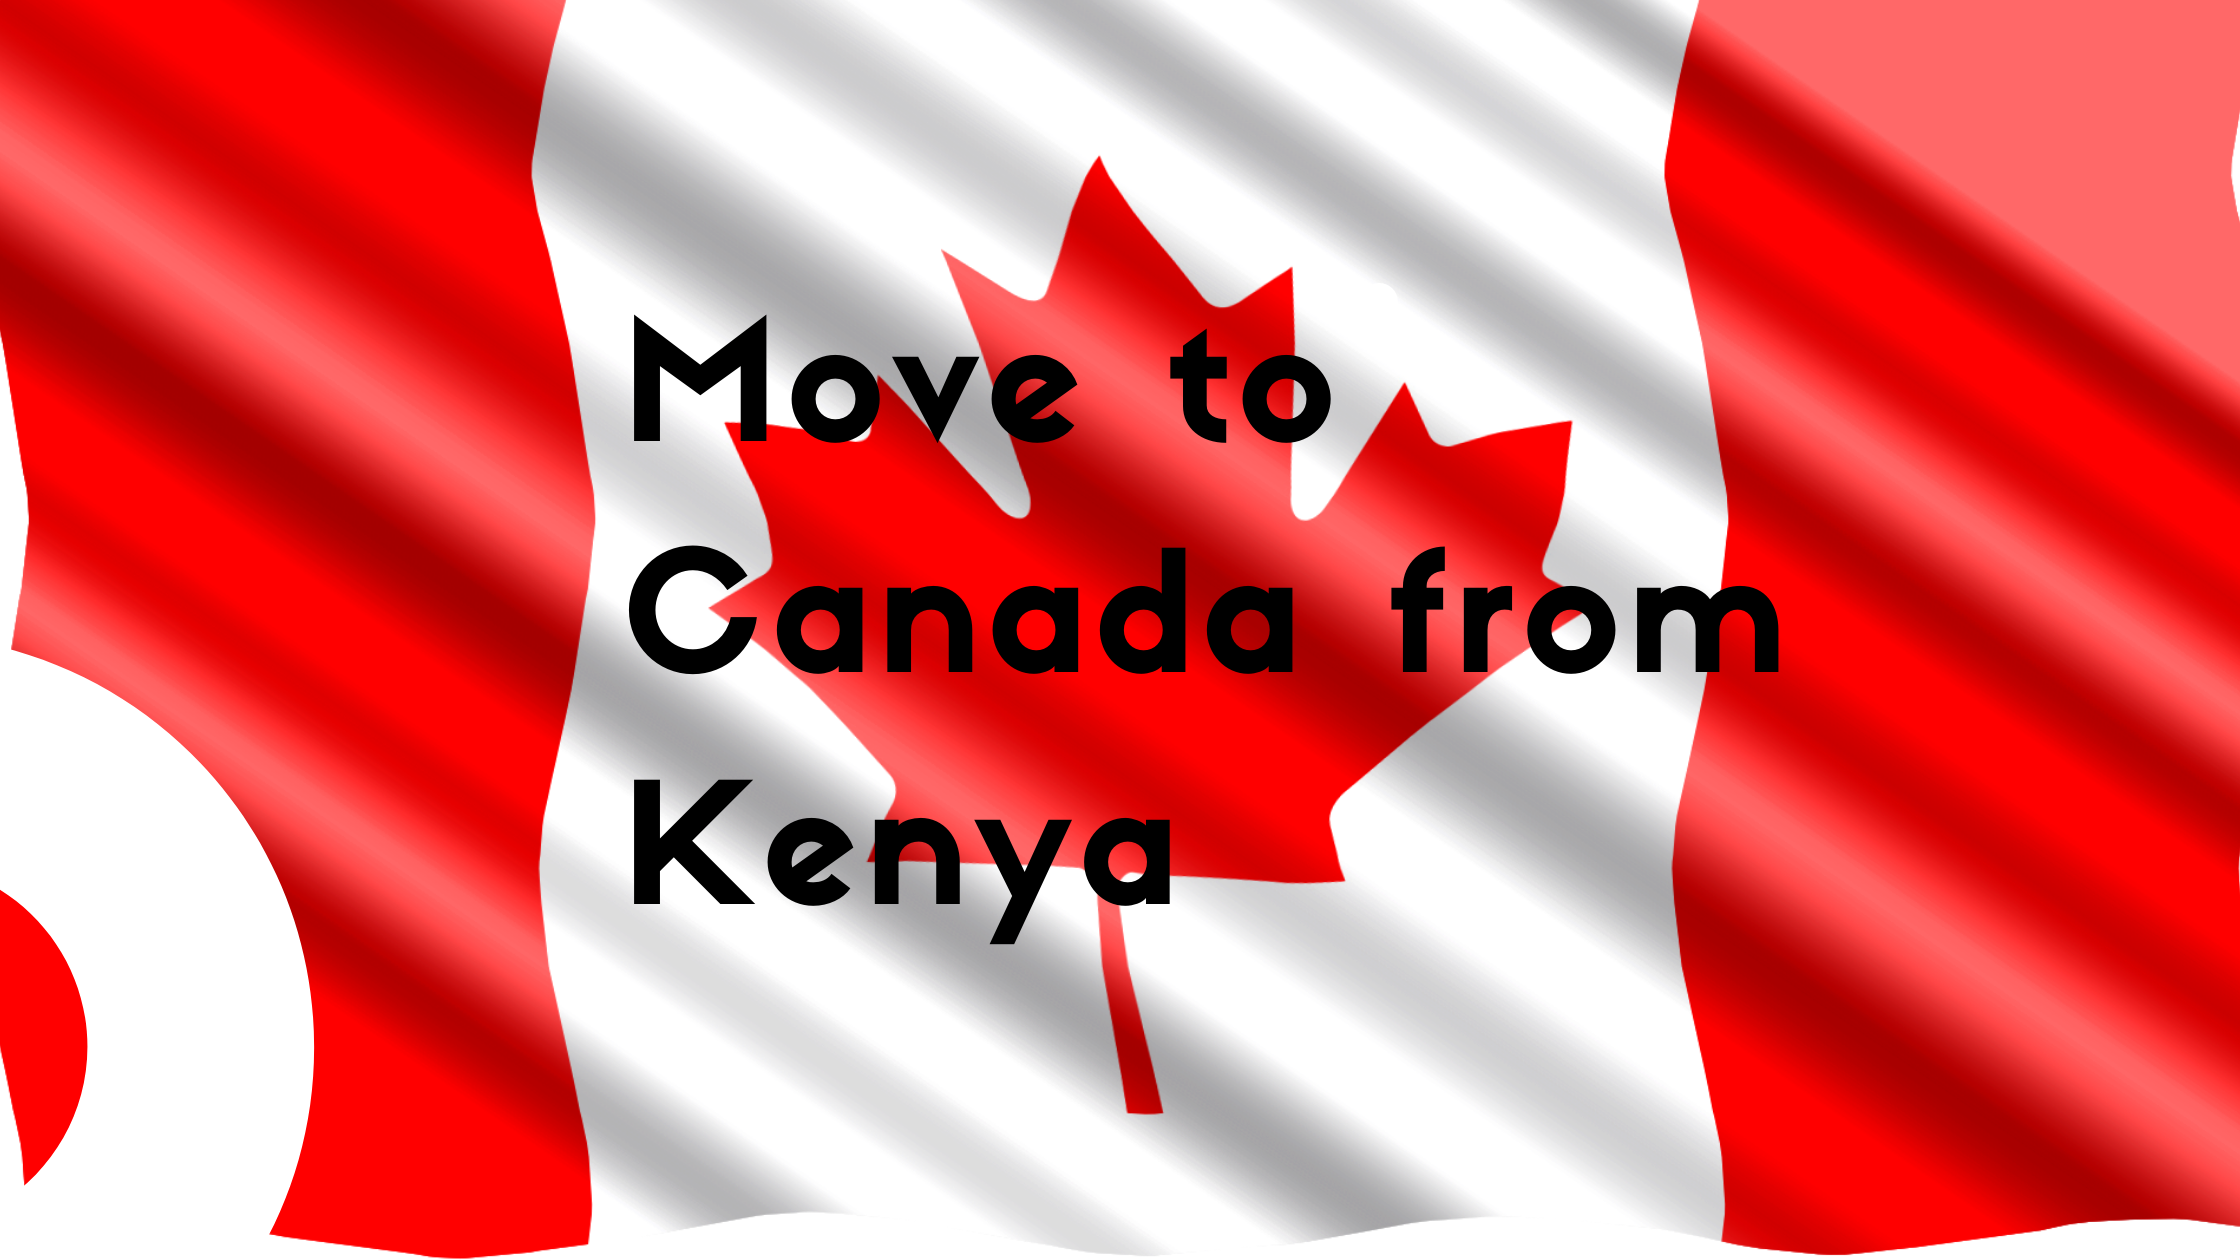 immigrate to Canada from Kenya